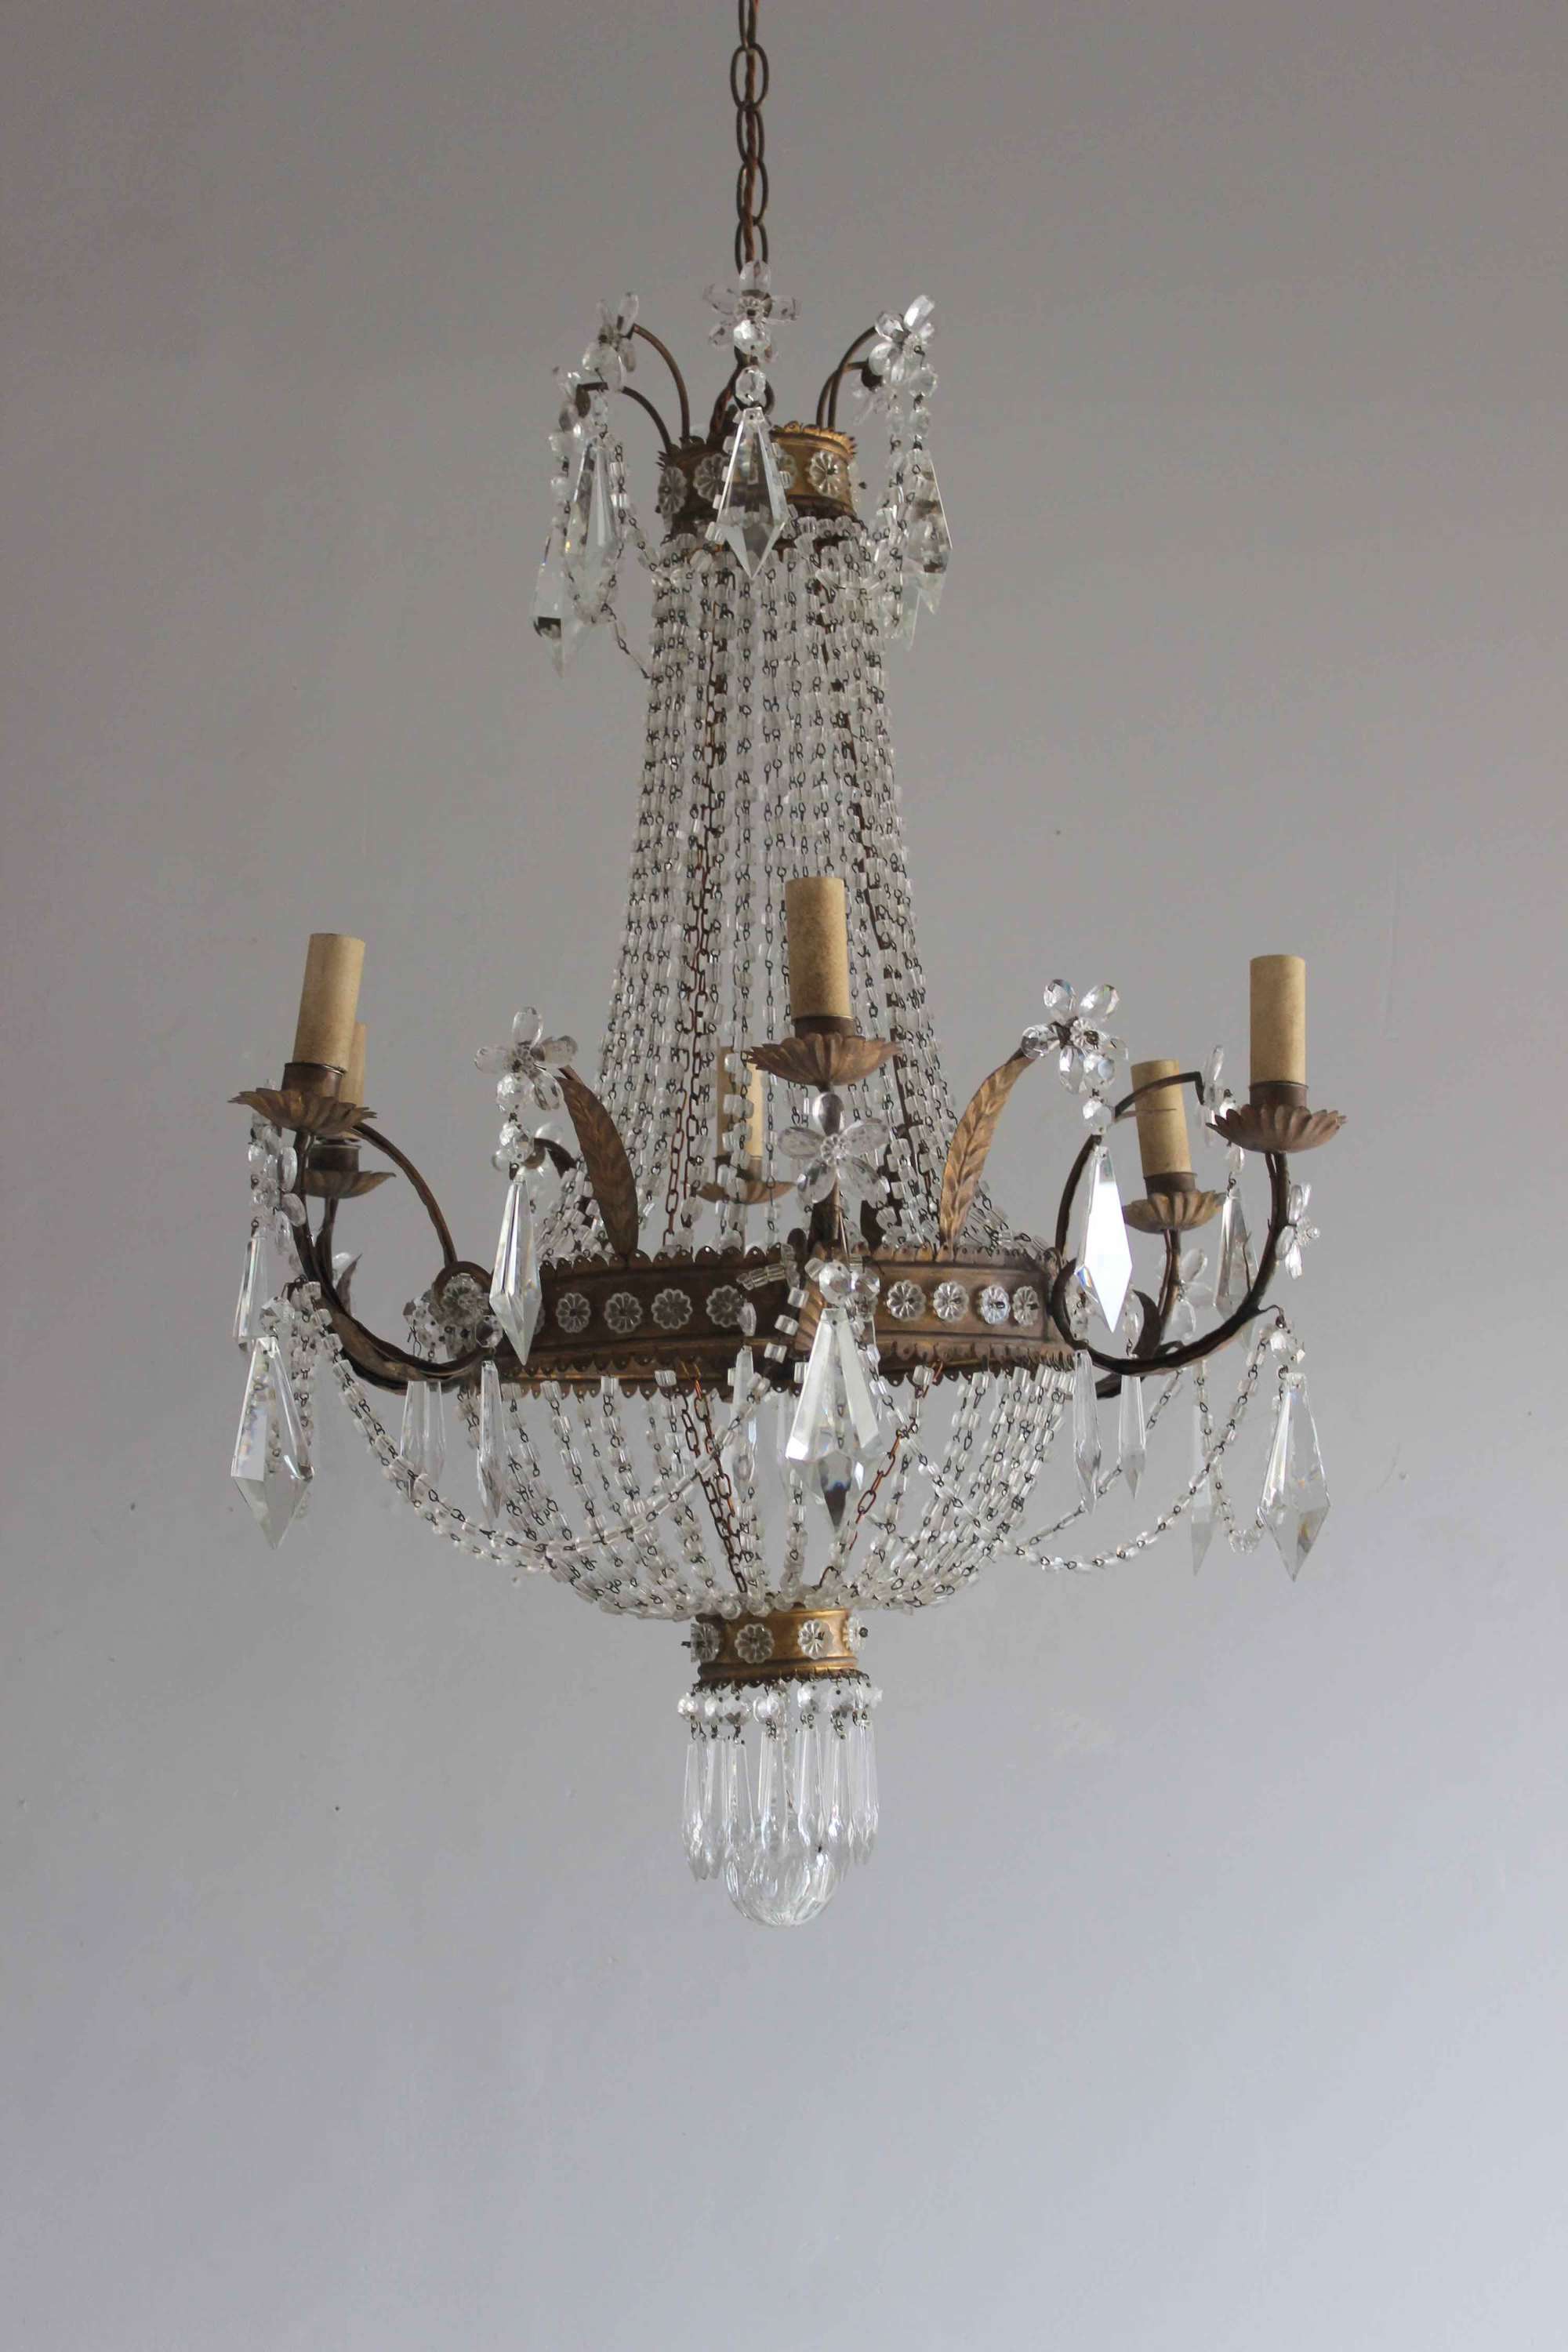 Italian antique chandelier  with beads and cut glass